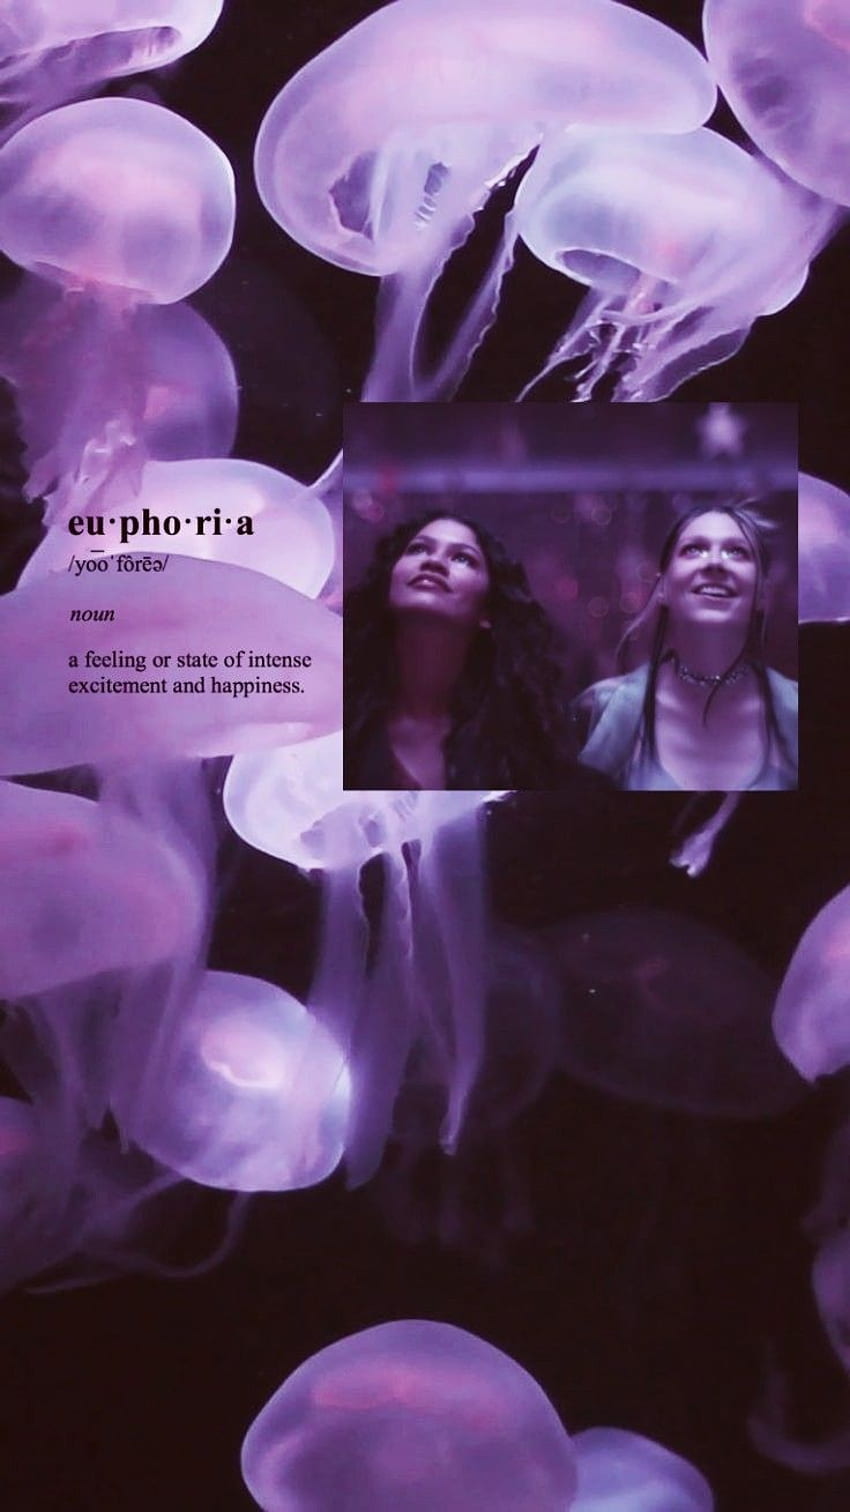 A purple aesthetic background image of jellyfish with two girls in the background. - Euphoria